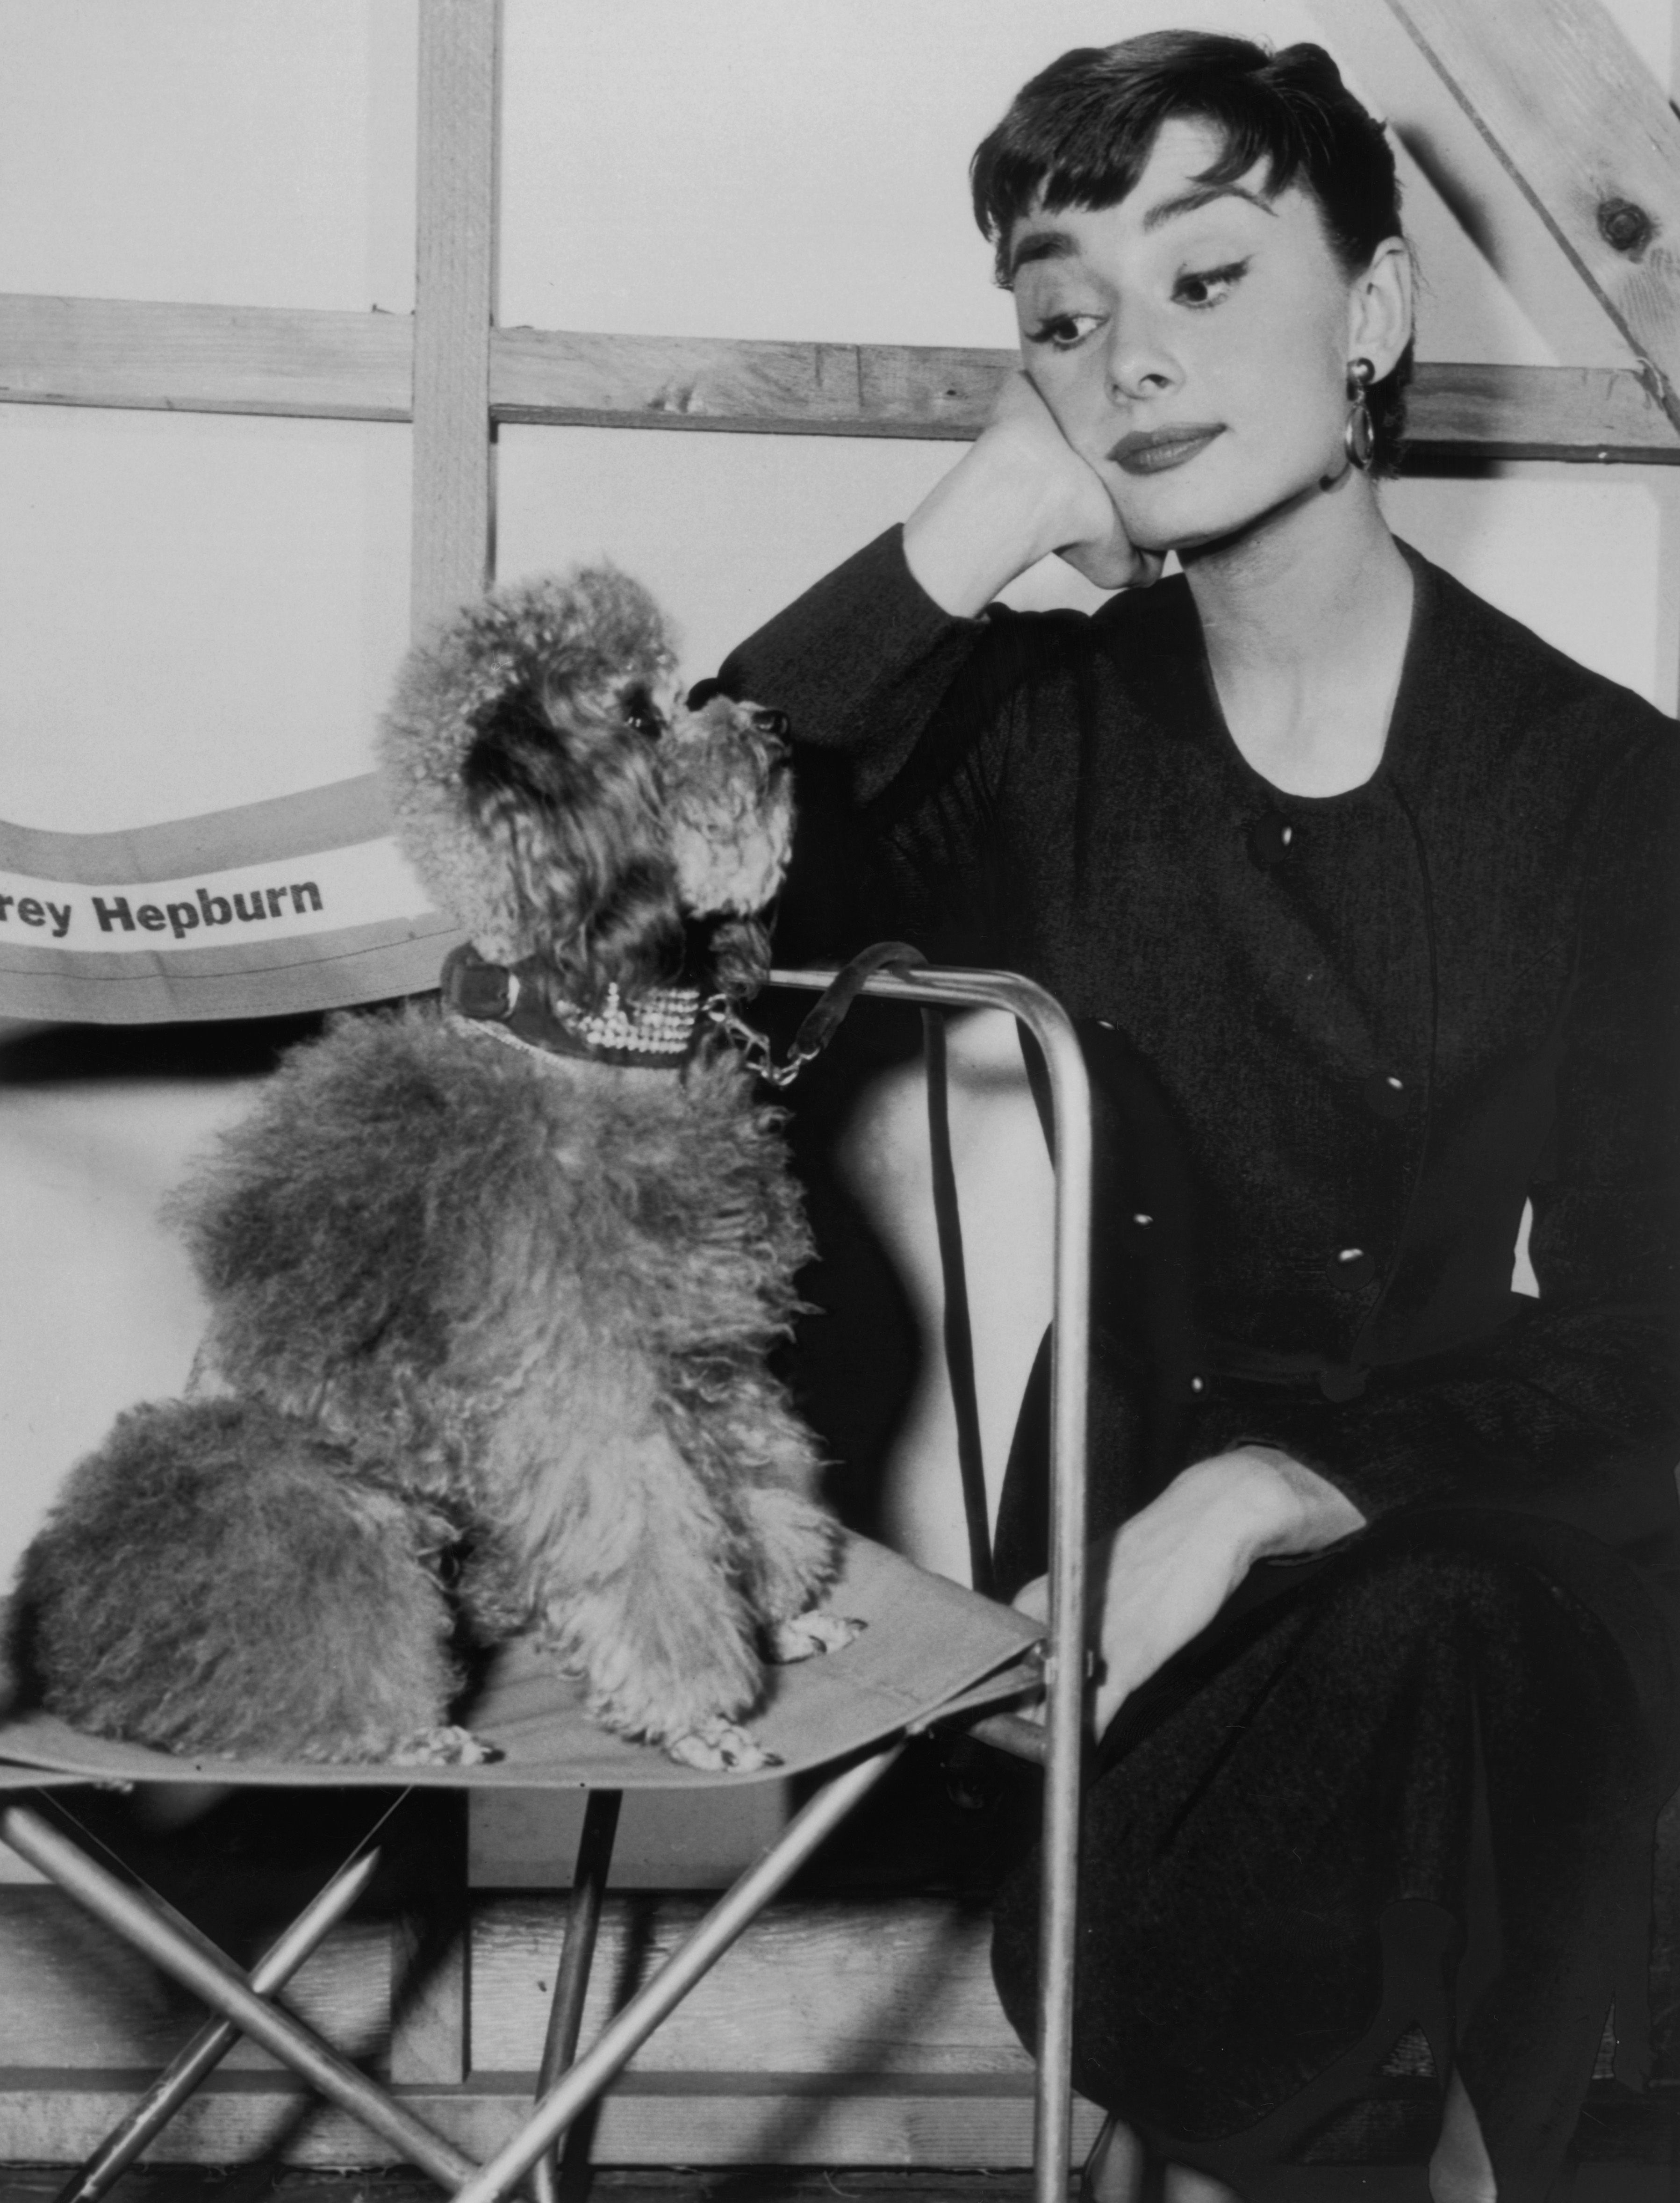 Audrey Hepburn on set with her pet dog, Mr Famous, circa 1960 | Source: Getty Images